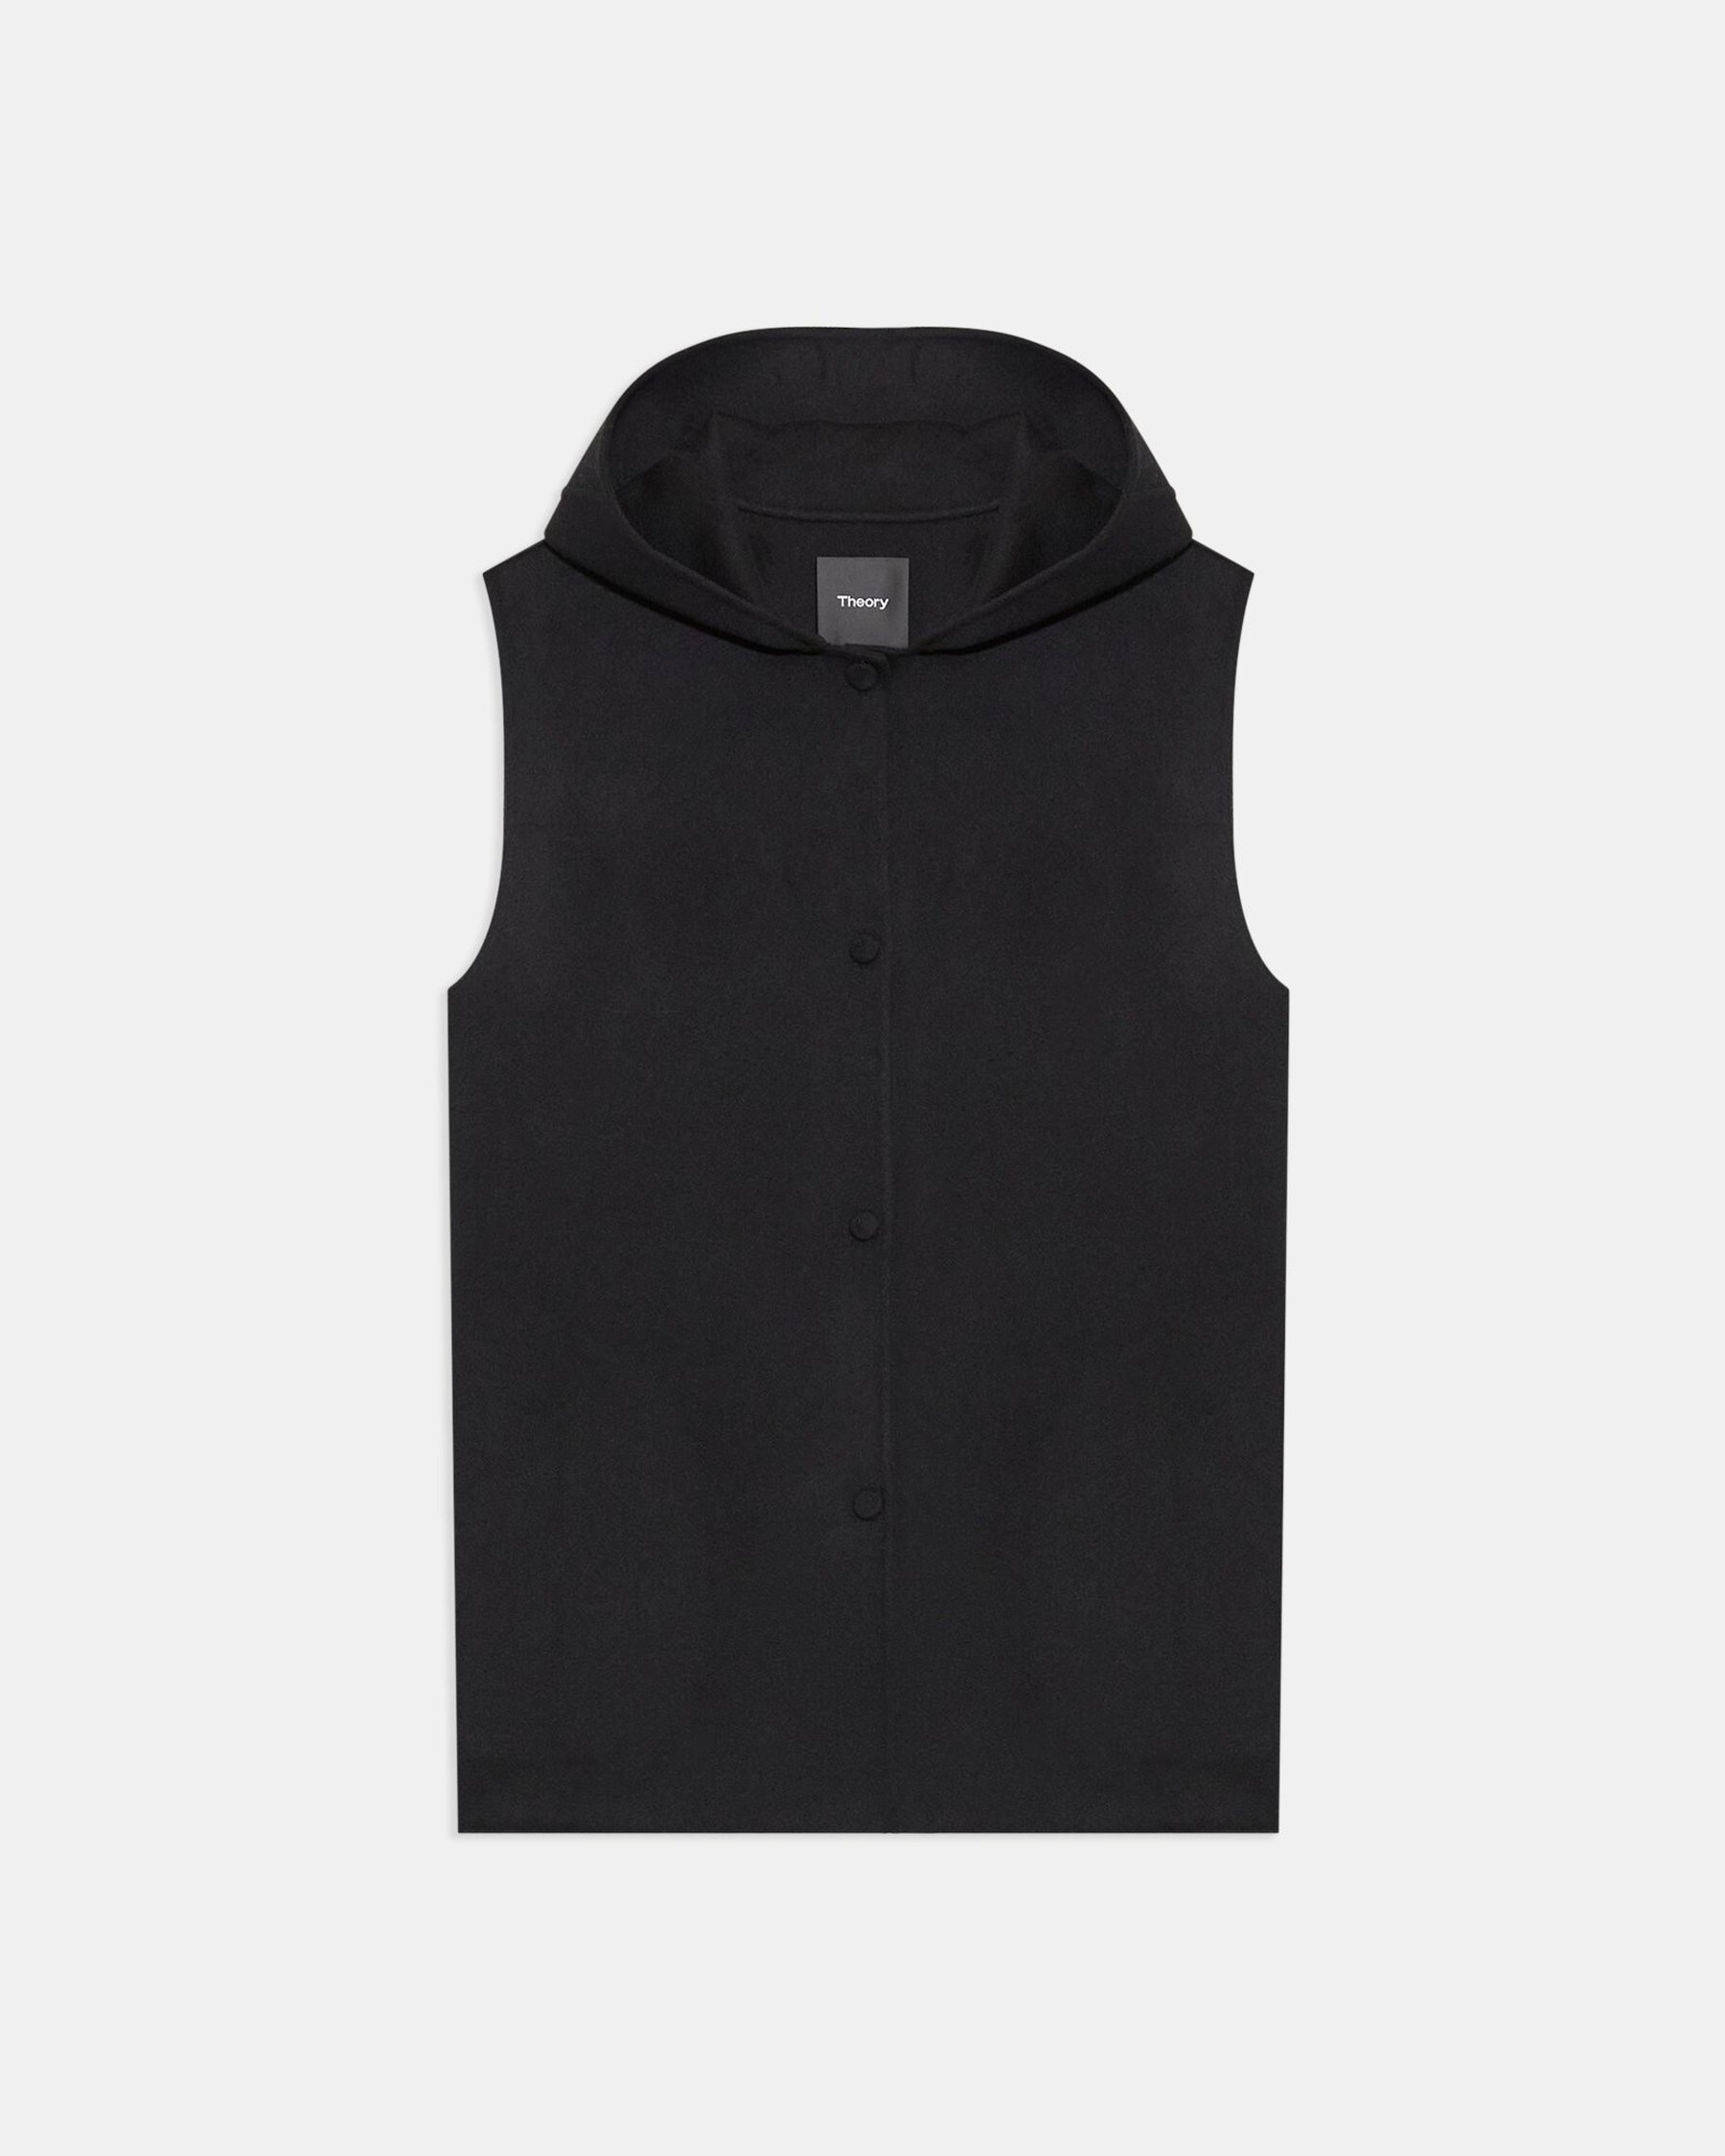 Clairene Vest in Double-Face Wool-Cashmere